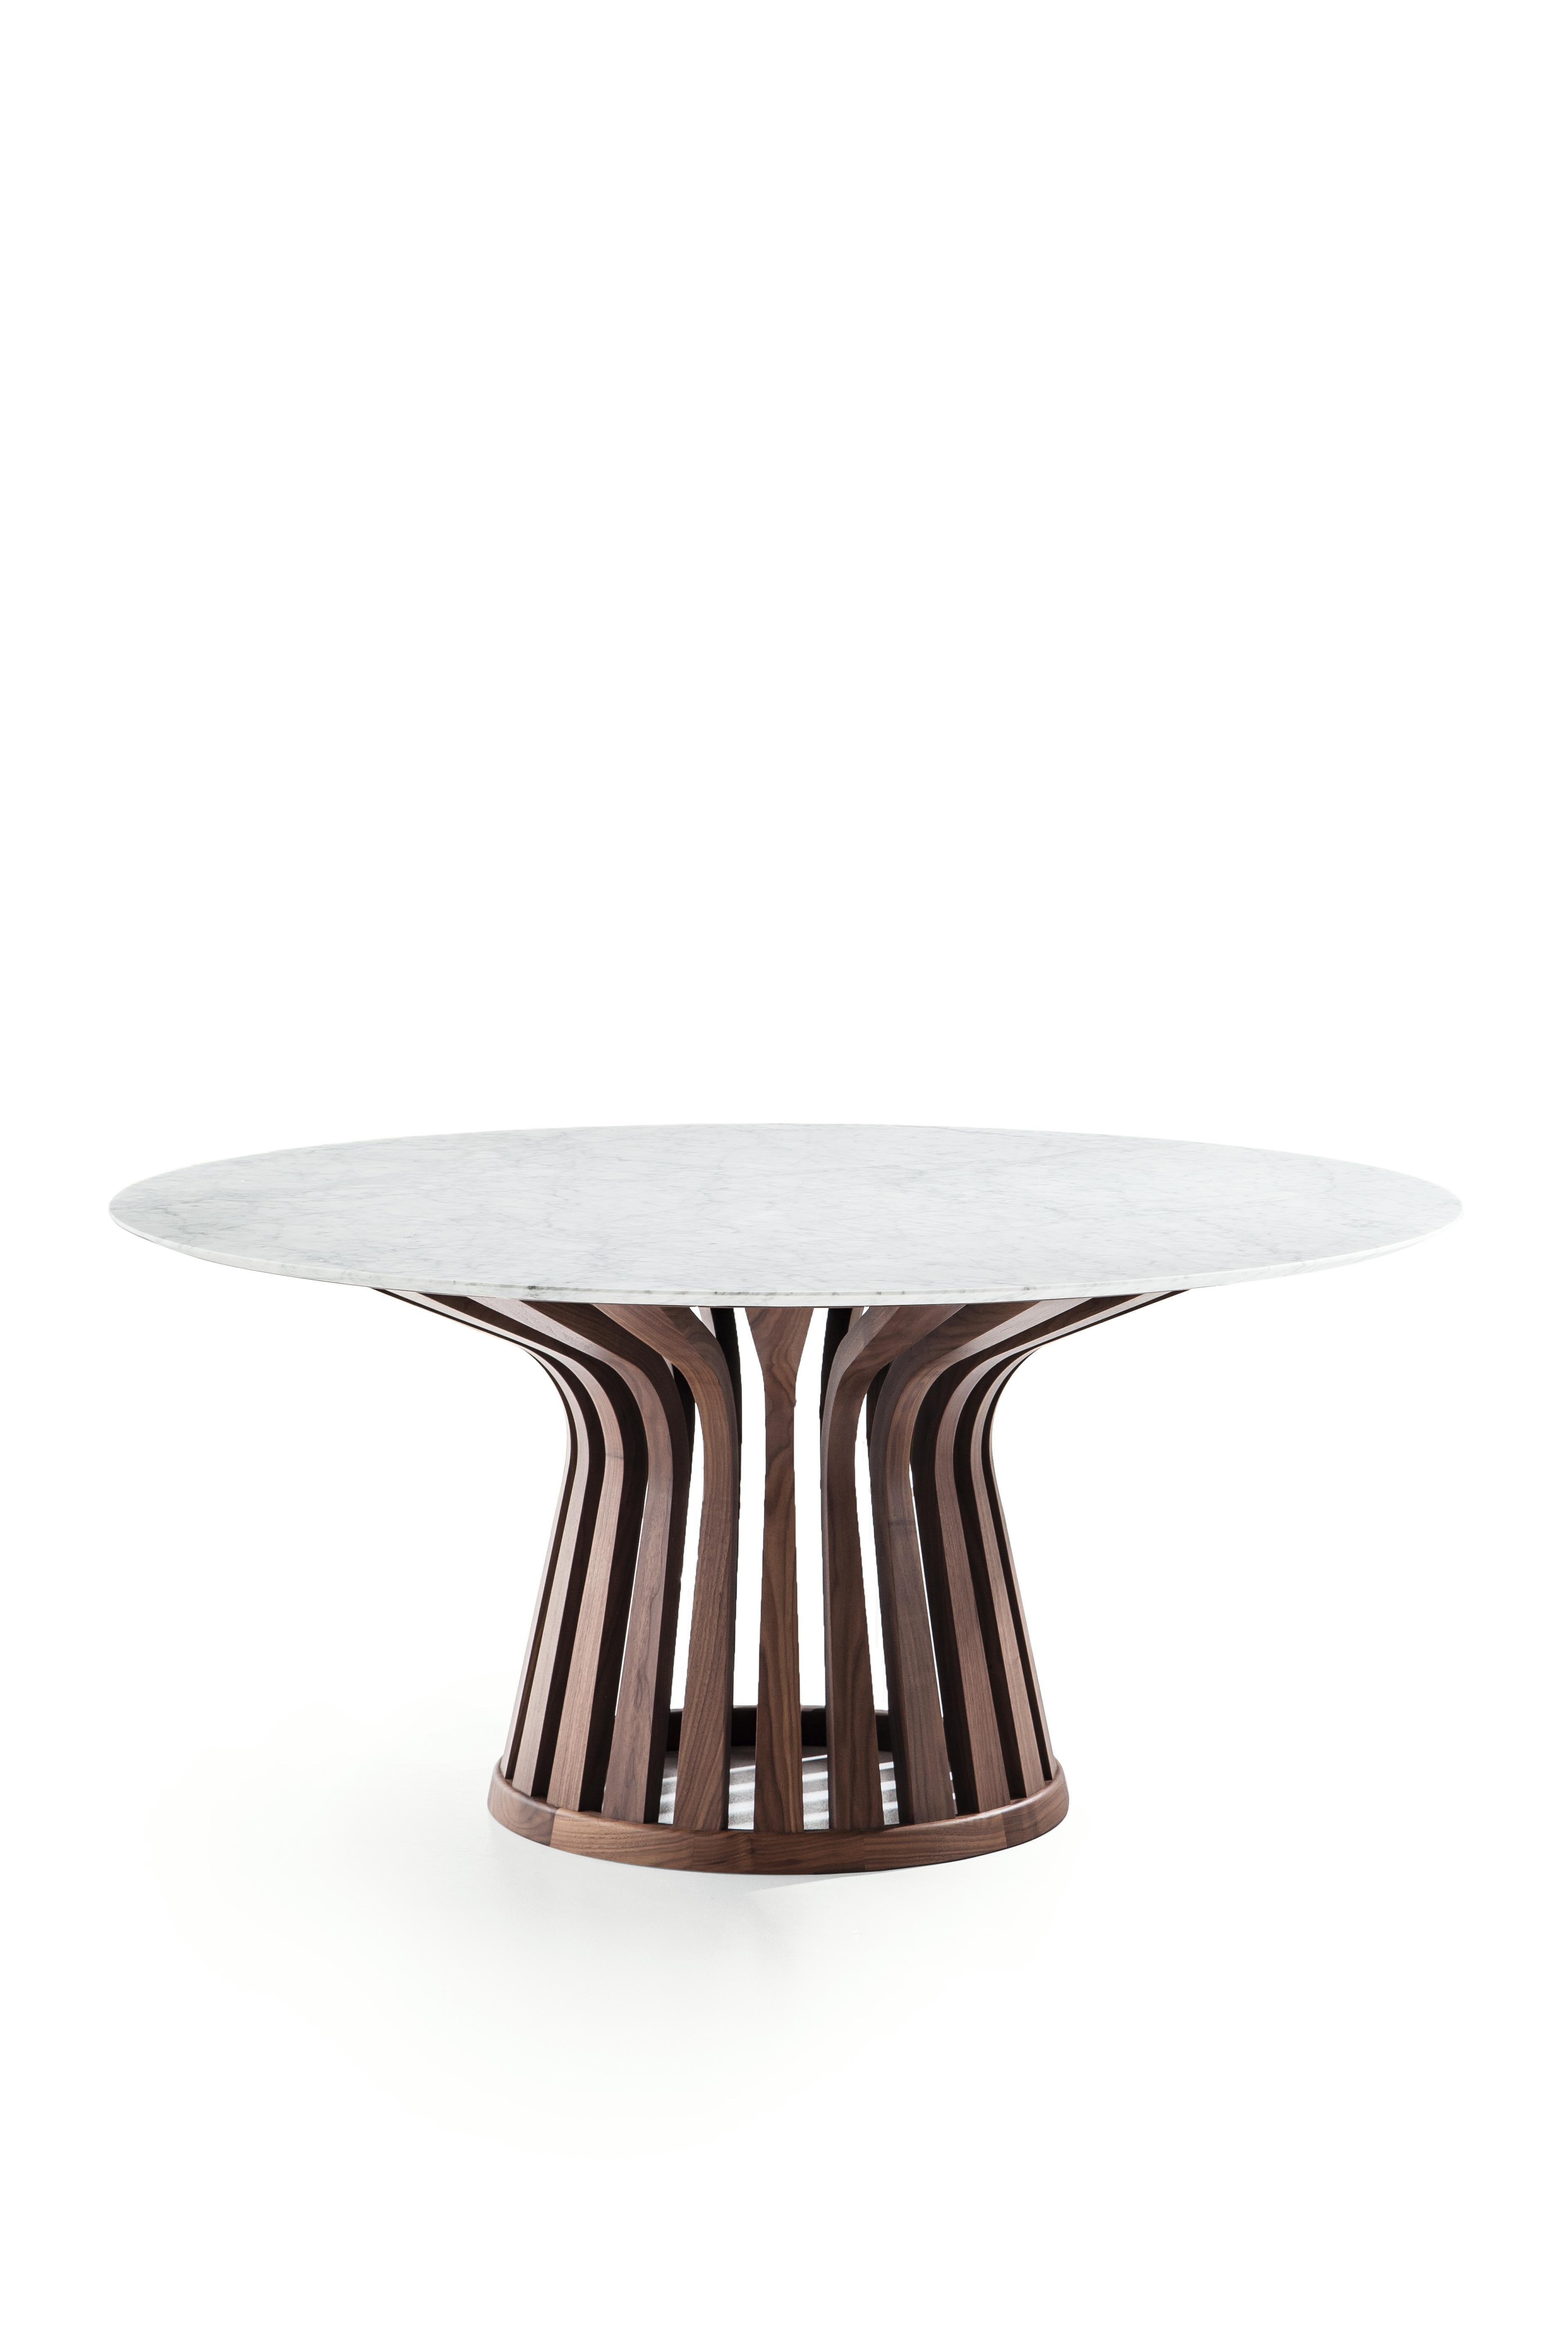 Lebeau Wood and Marble Table by Patrick Jouin For Sale 1